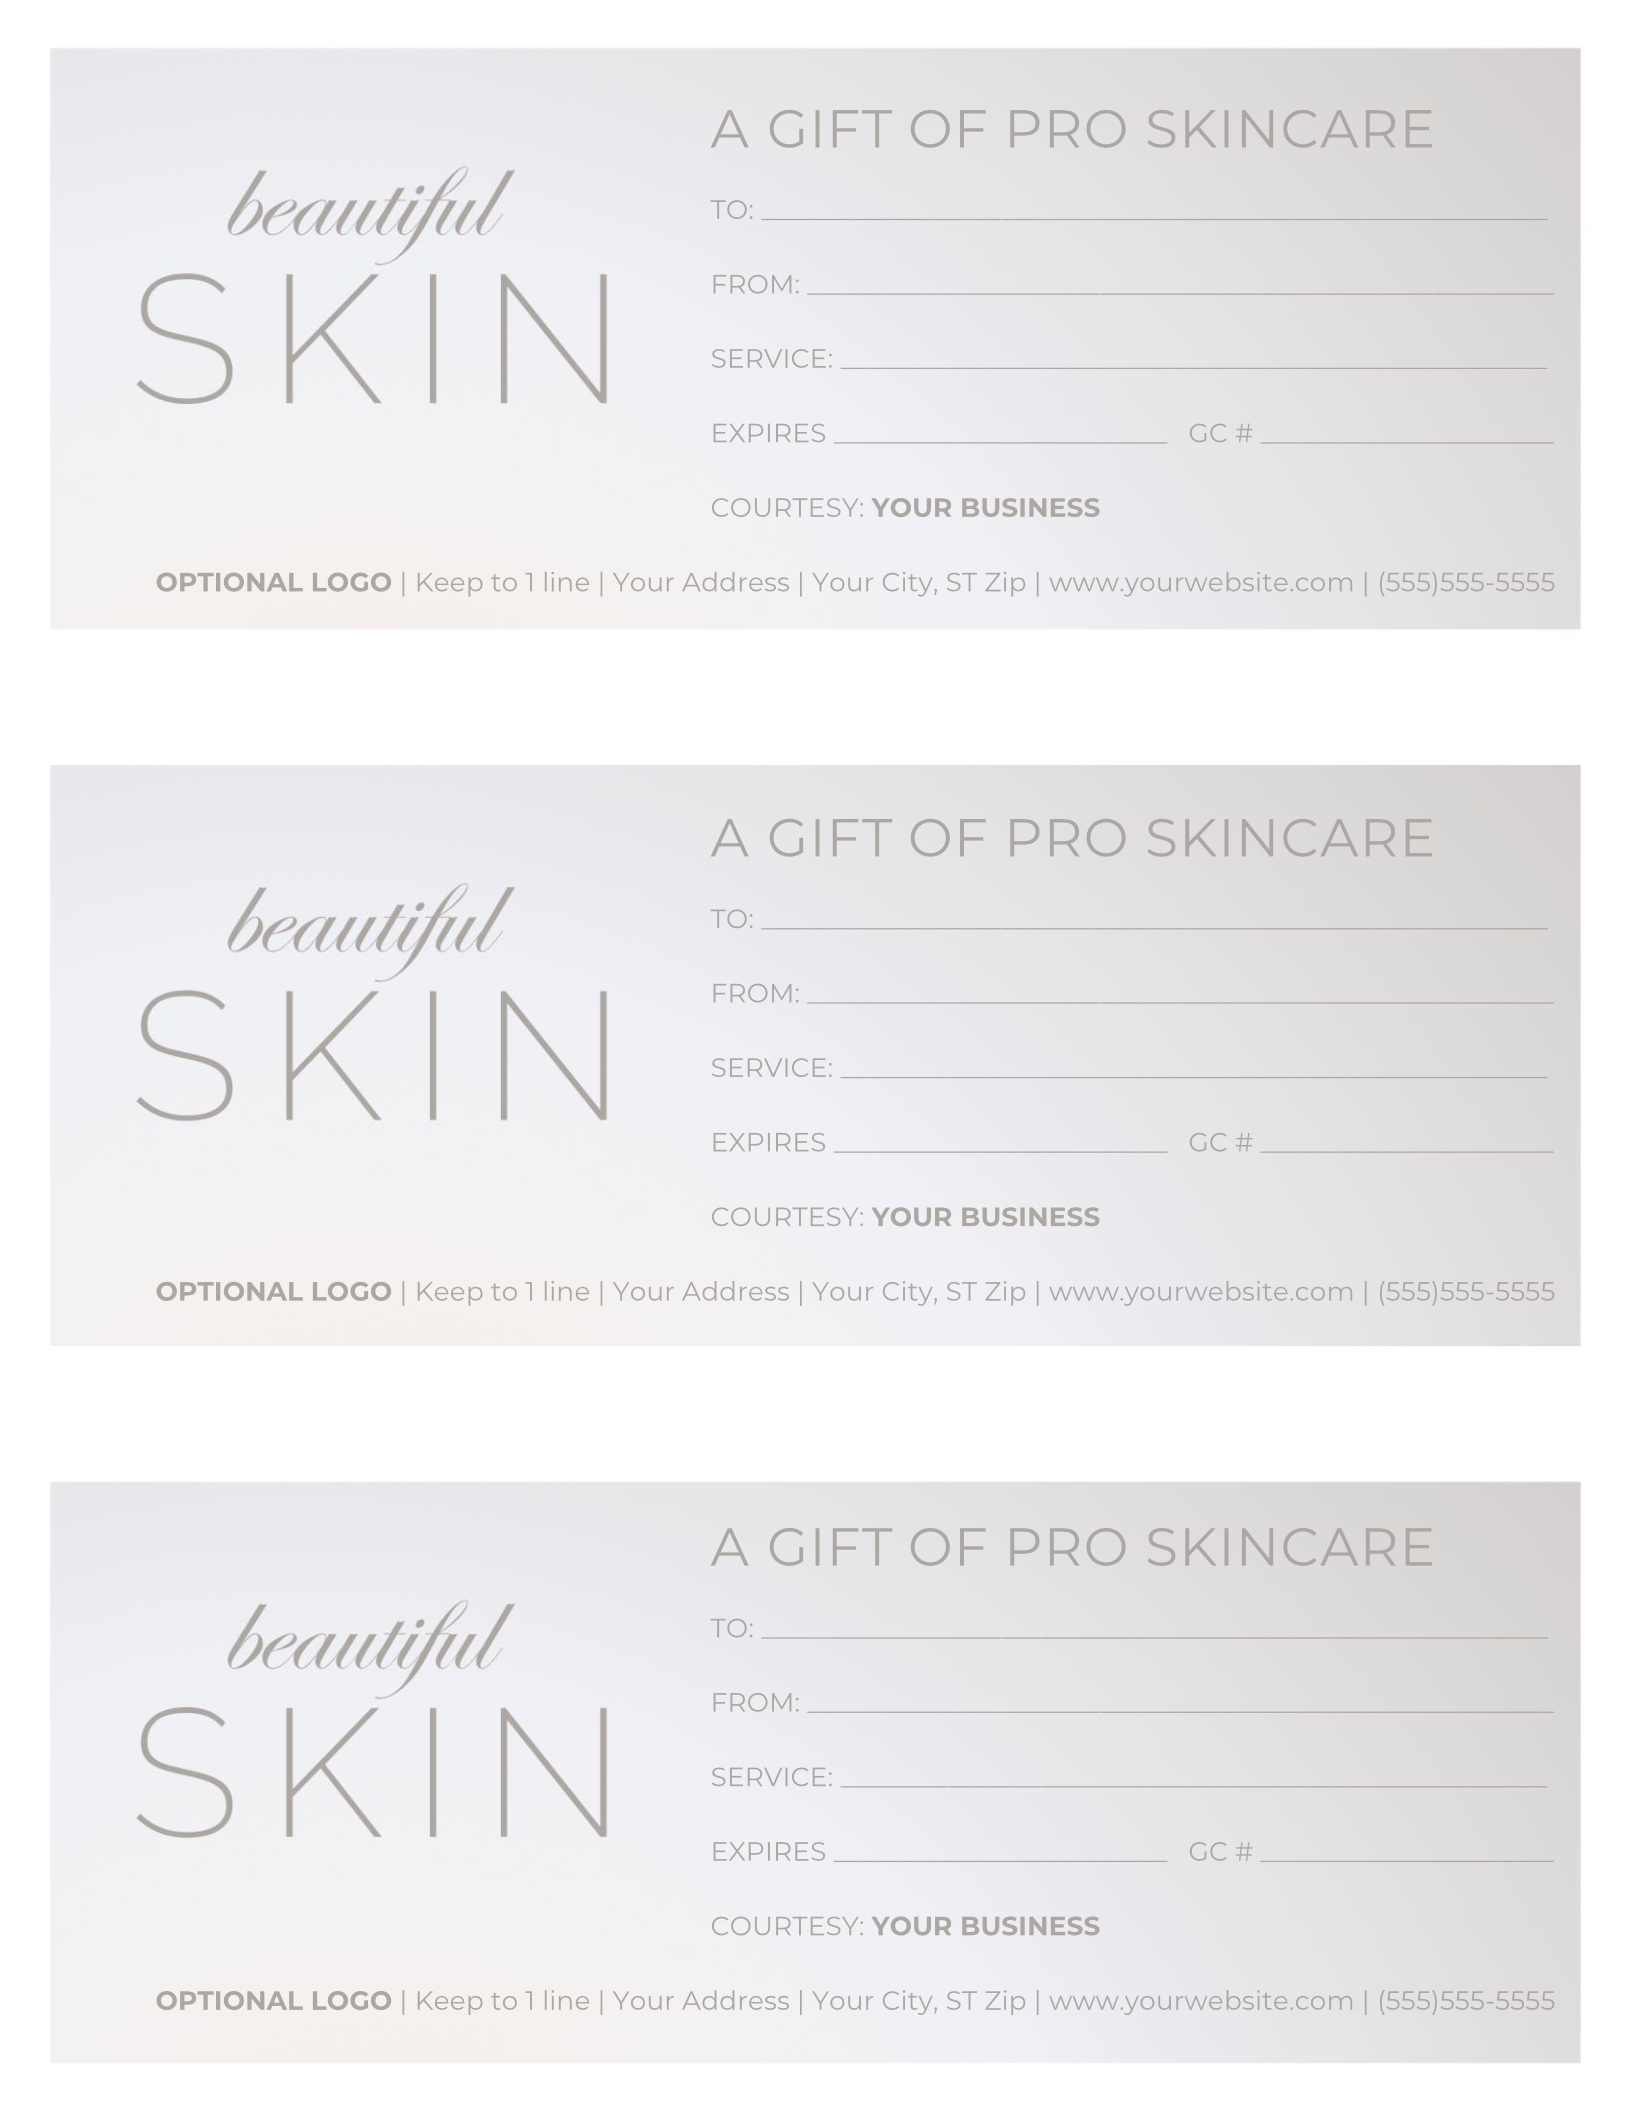 Free Gift Certificate Templates For Massage And Spa Within Spa Day Gift Certificate Template